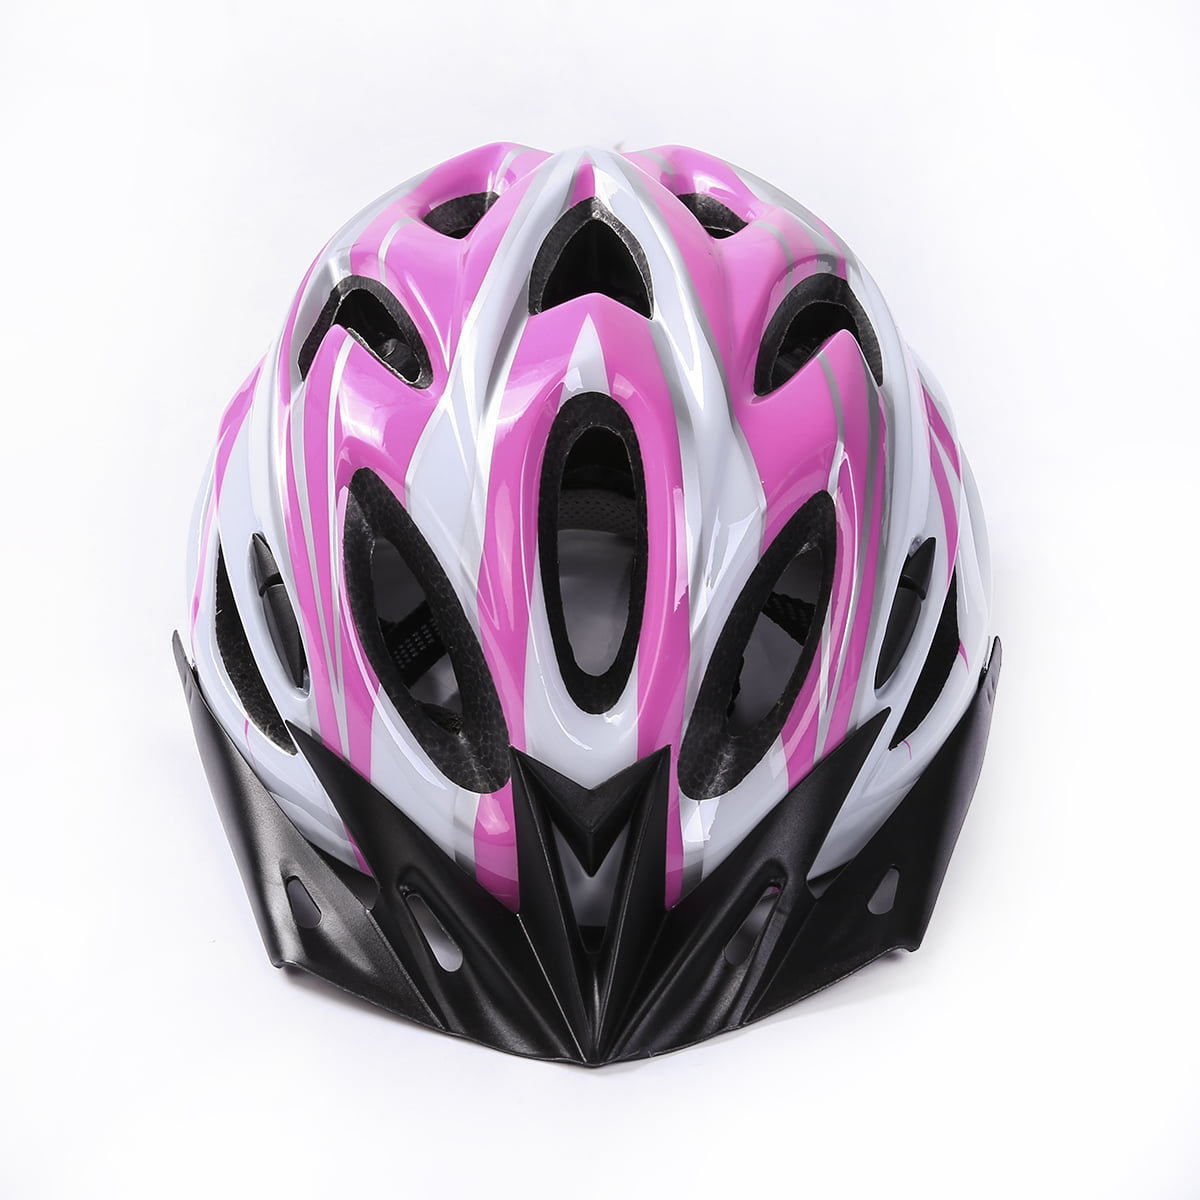 Unisex Adult Bike Helmets, Adjustable Size Road Bicycle Helmet Safety Riding Helmet for Riding Road Cycling Mountain